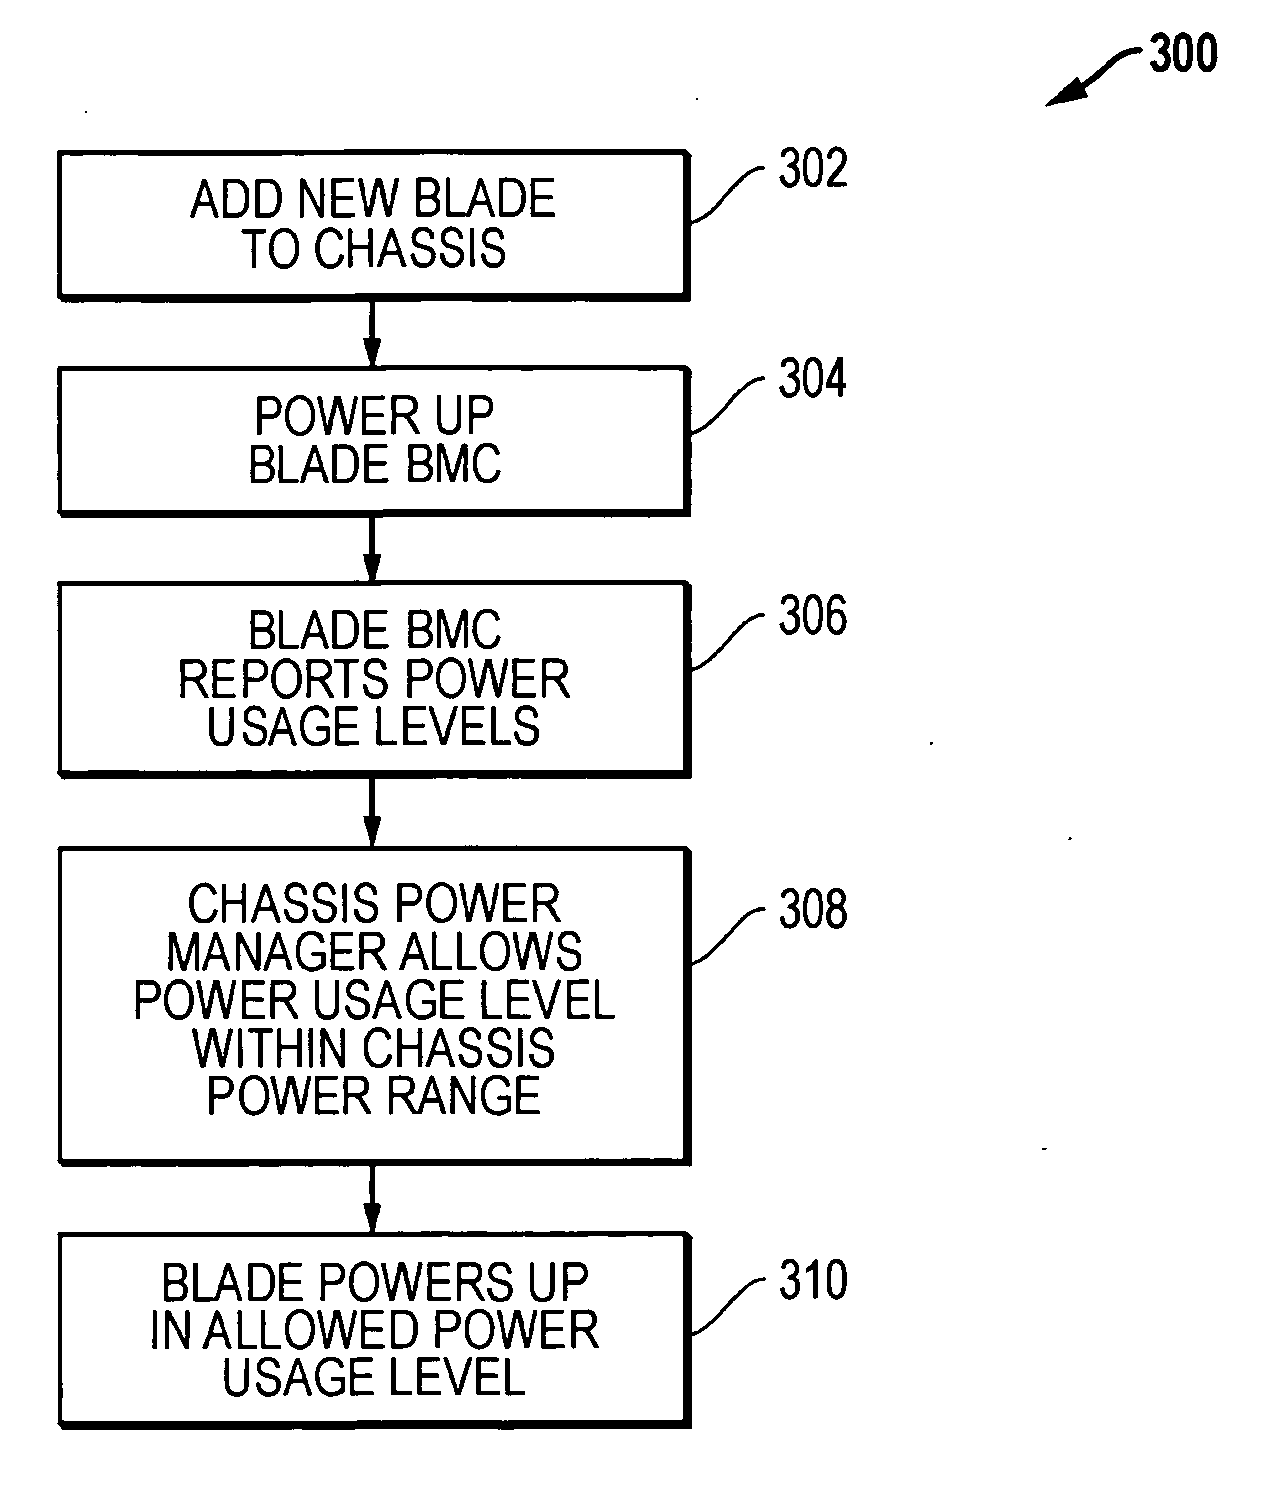 System and method for power usage level management of blades installed within blade servers